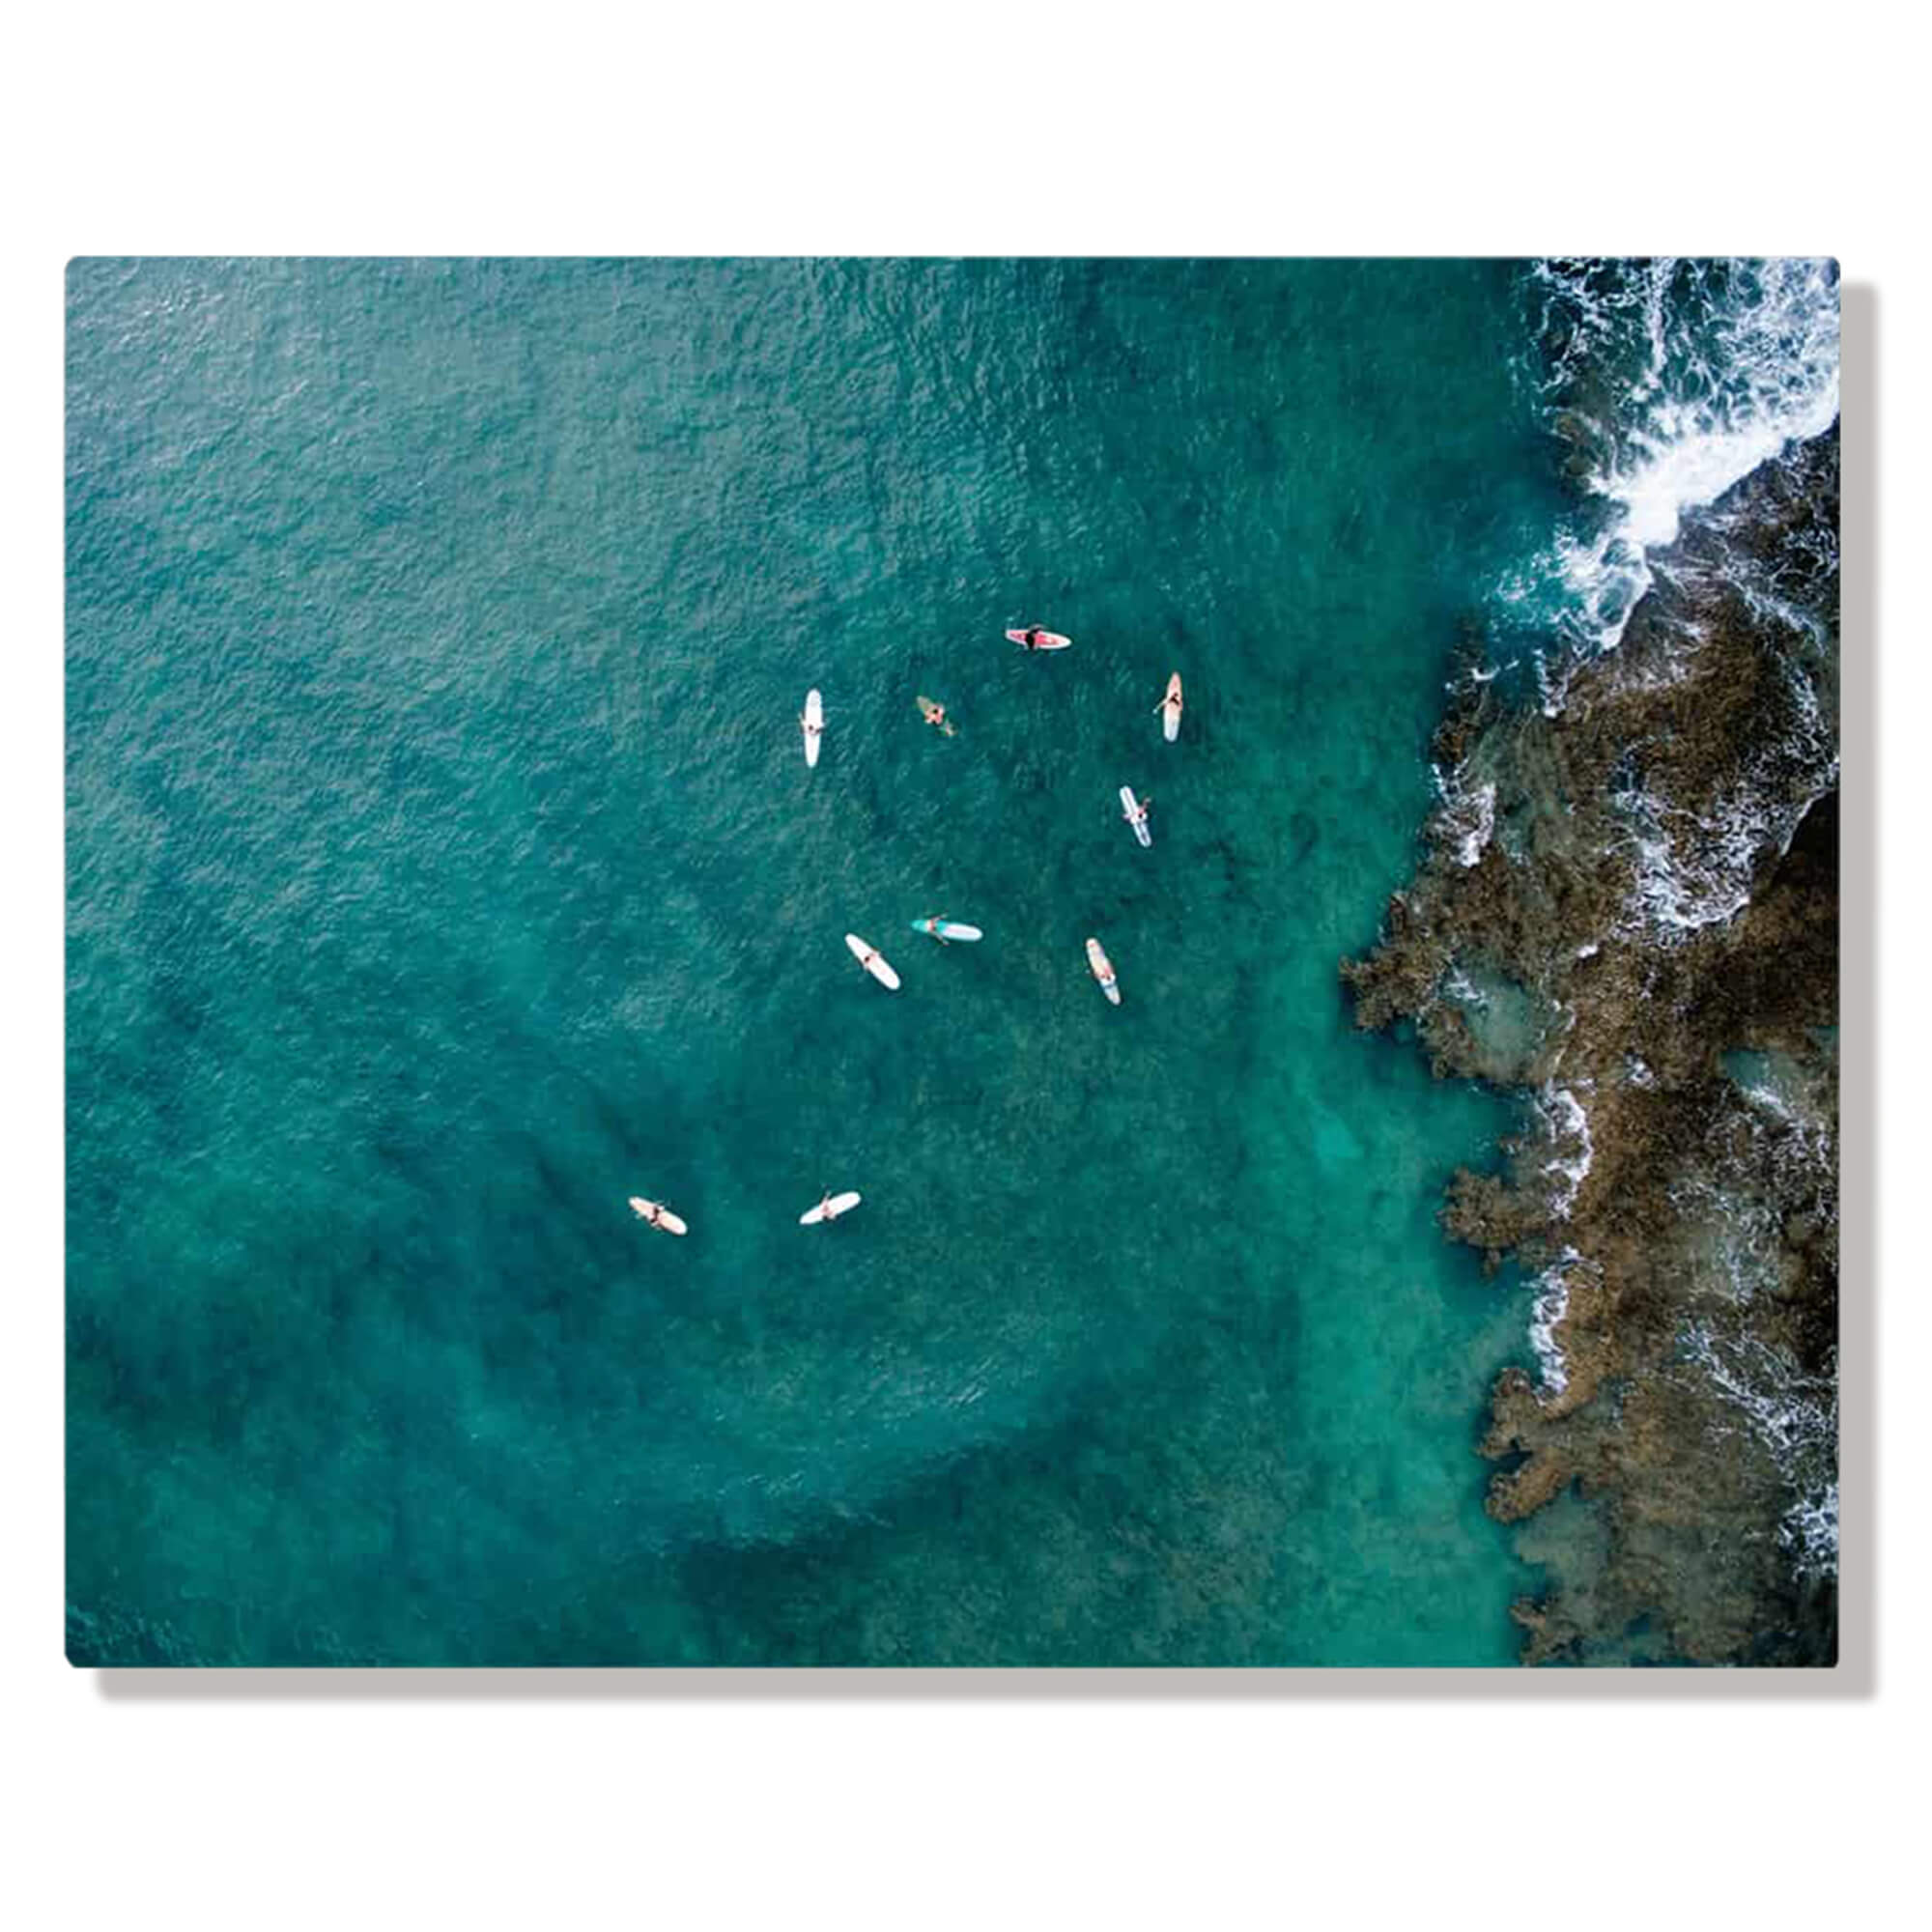 A metal art print of a dramatic aerial seascape print depicts a drone photo of surfers near Turtle Bay on the North Shore of Oahu by Hawaii artist Bree Poort